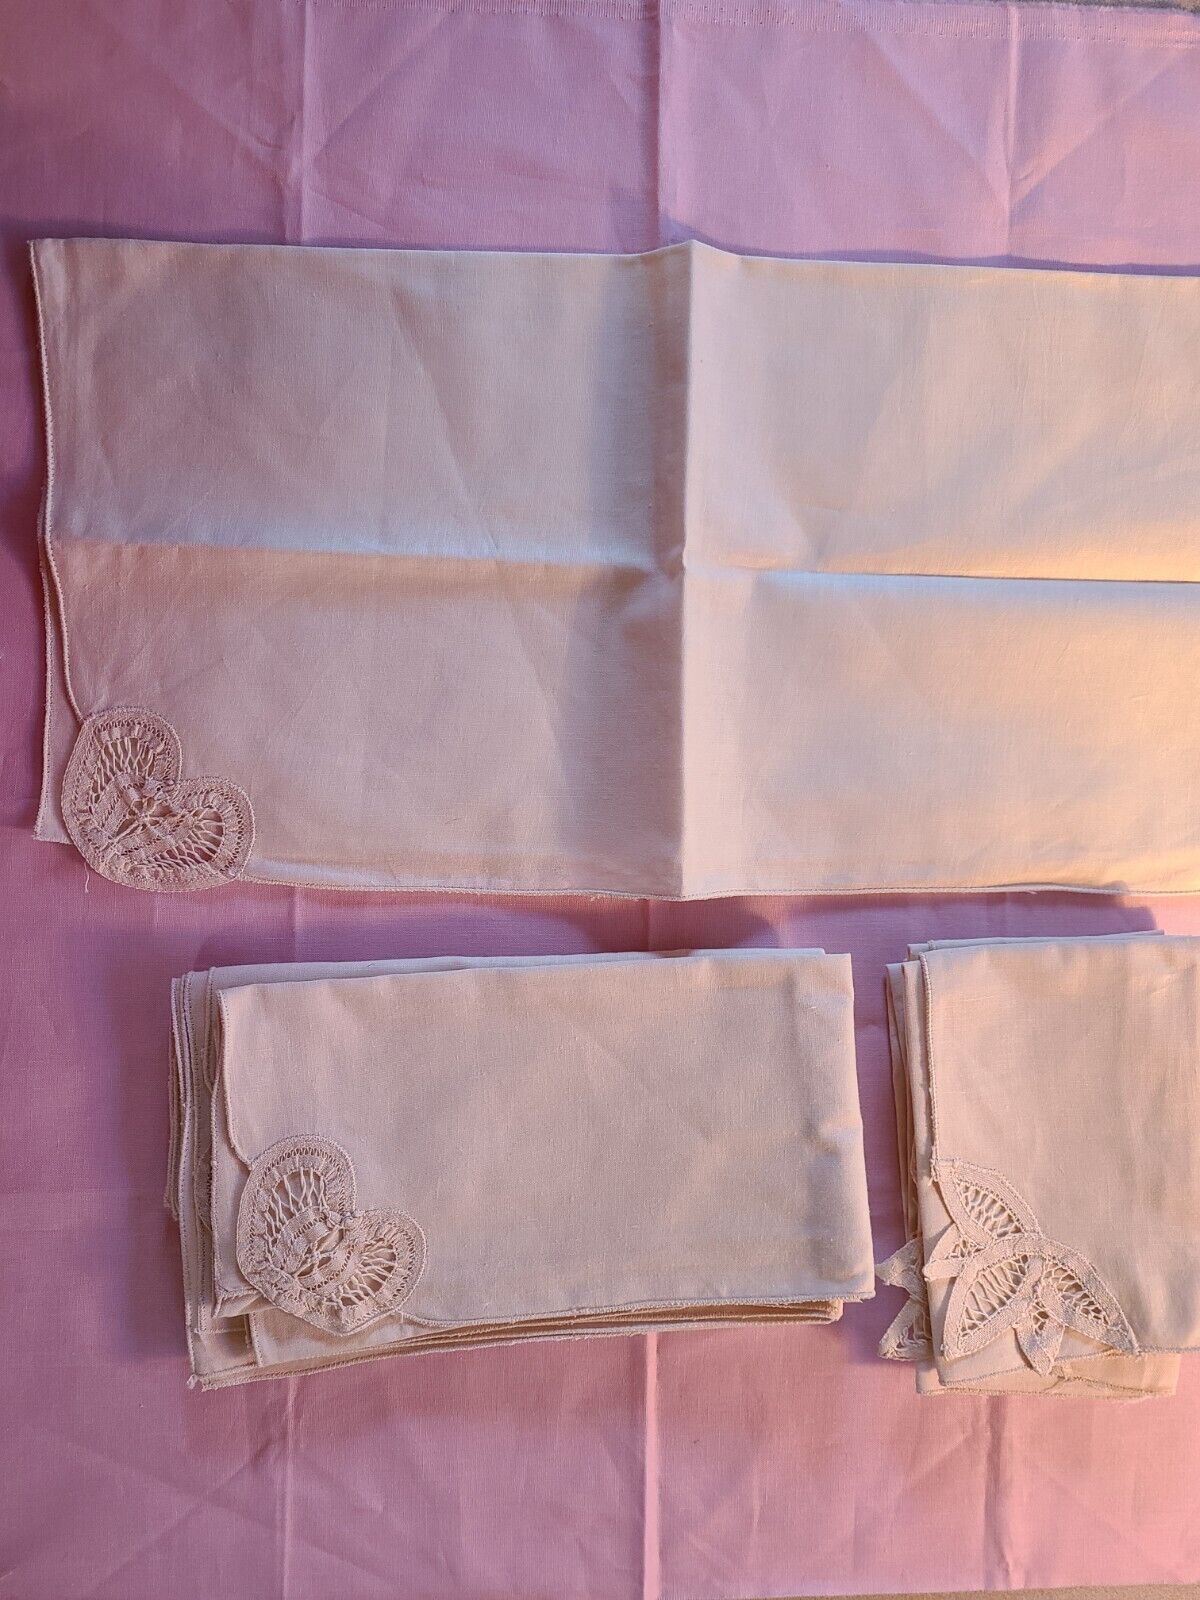 8 lovely antique ivory linen embroided napkins 2 sizes 4 @ 17\